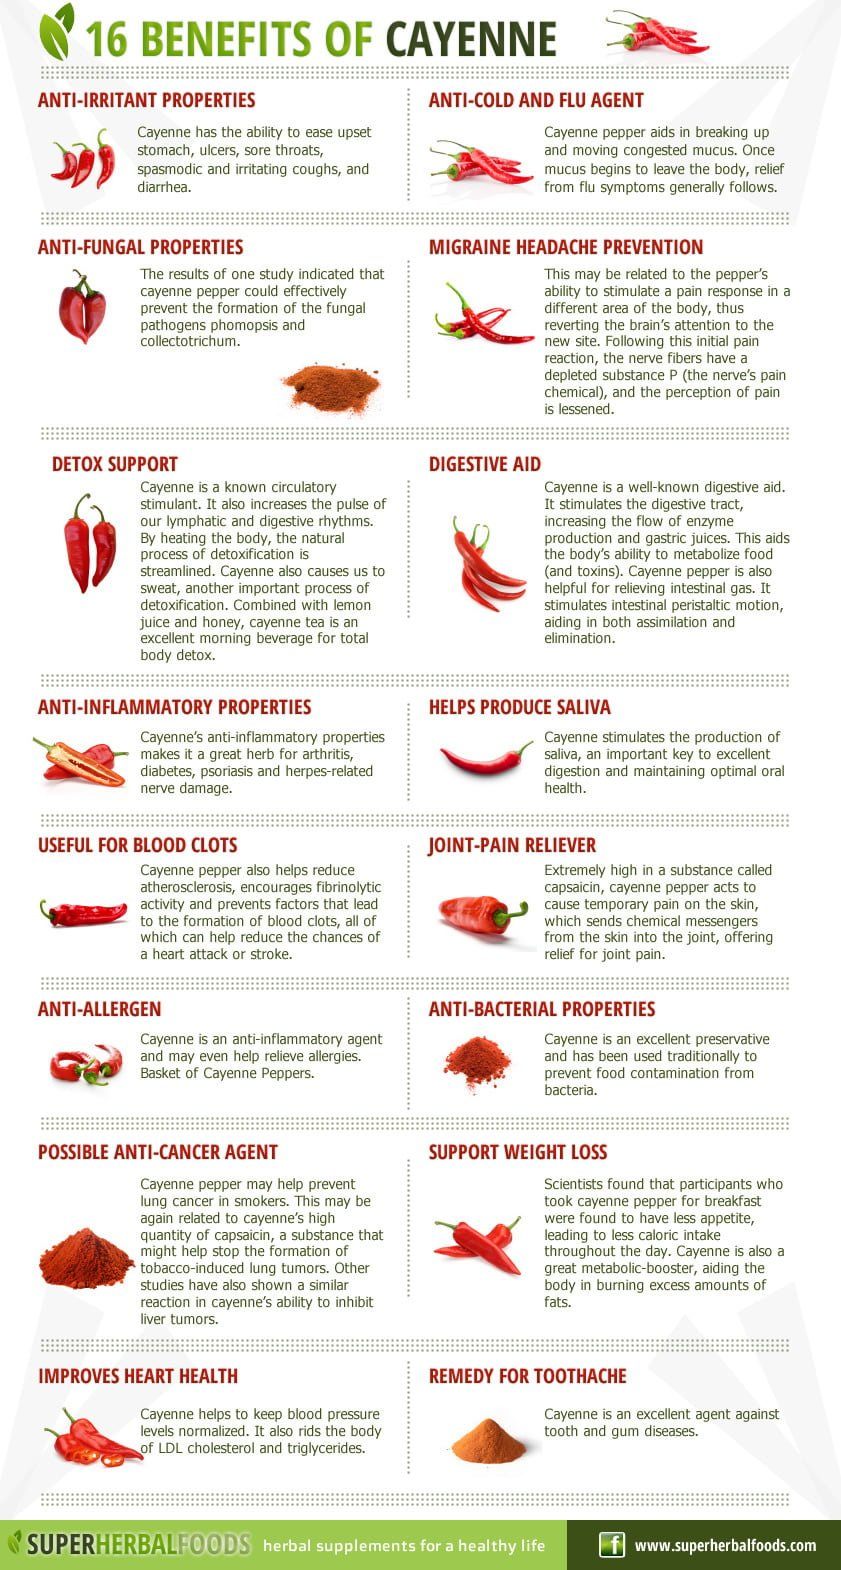 16 Benefits of Cayenne Infographic